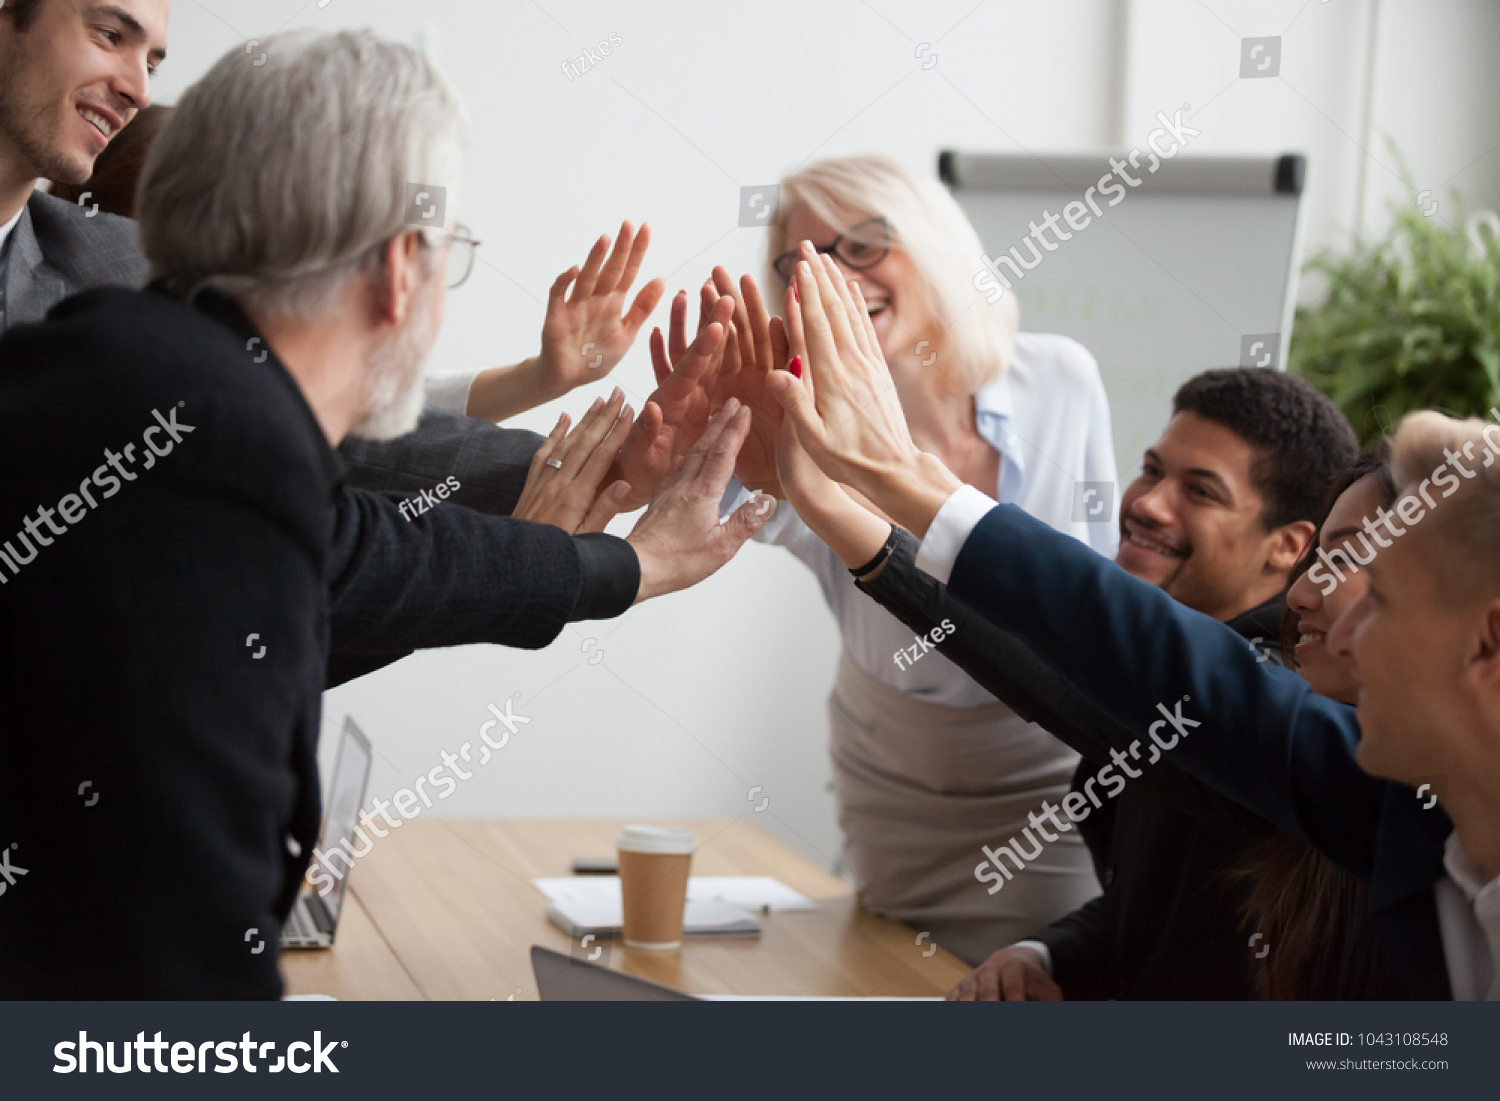 Multiracial young and senior business people join hands giving high five together, motivated diverse team showing team spirit synergy in goal achievement, promising help, supporting unity in teamwork #1043108548